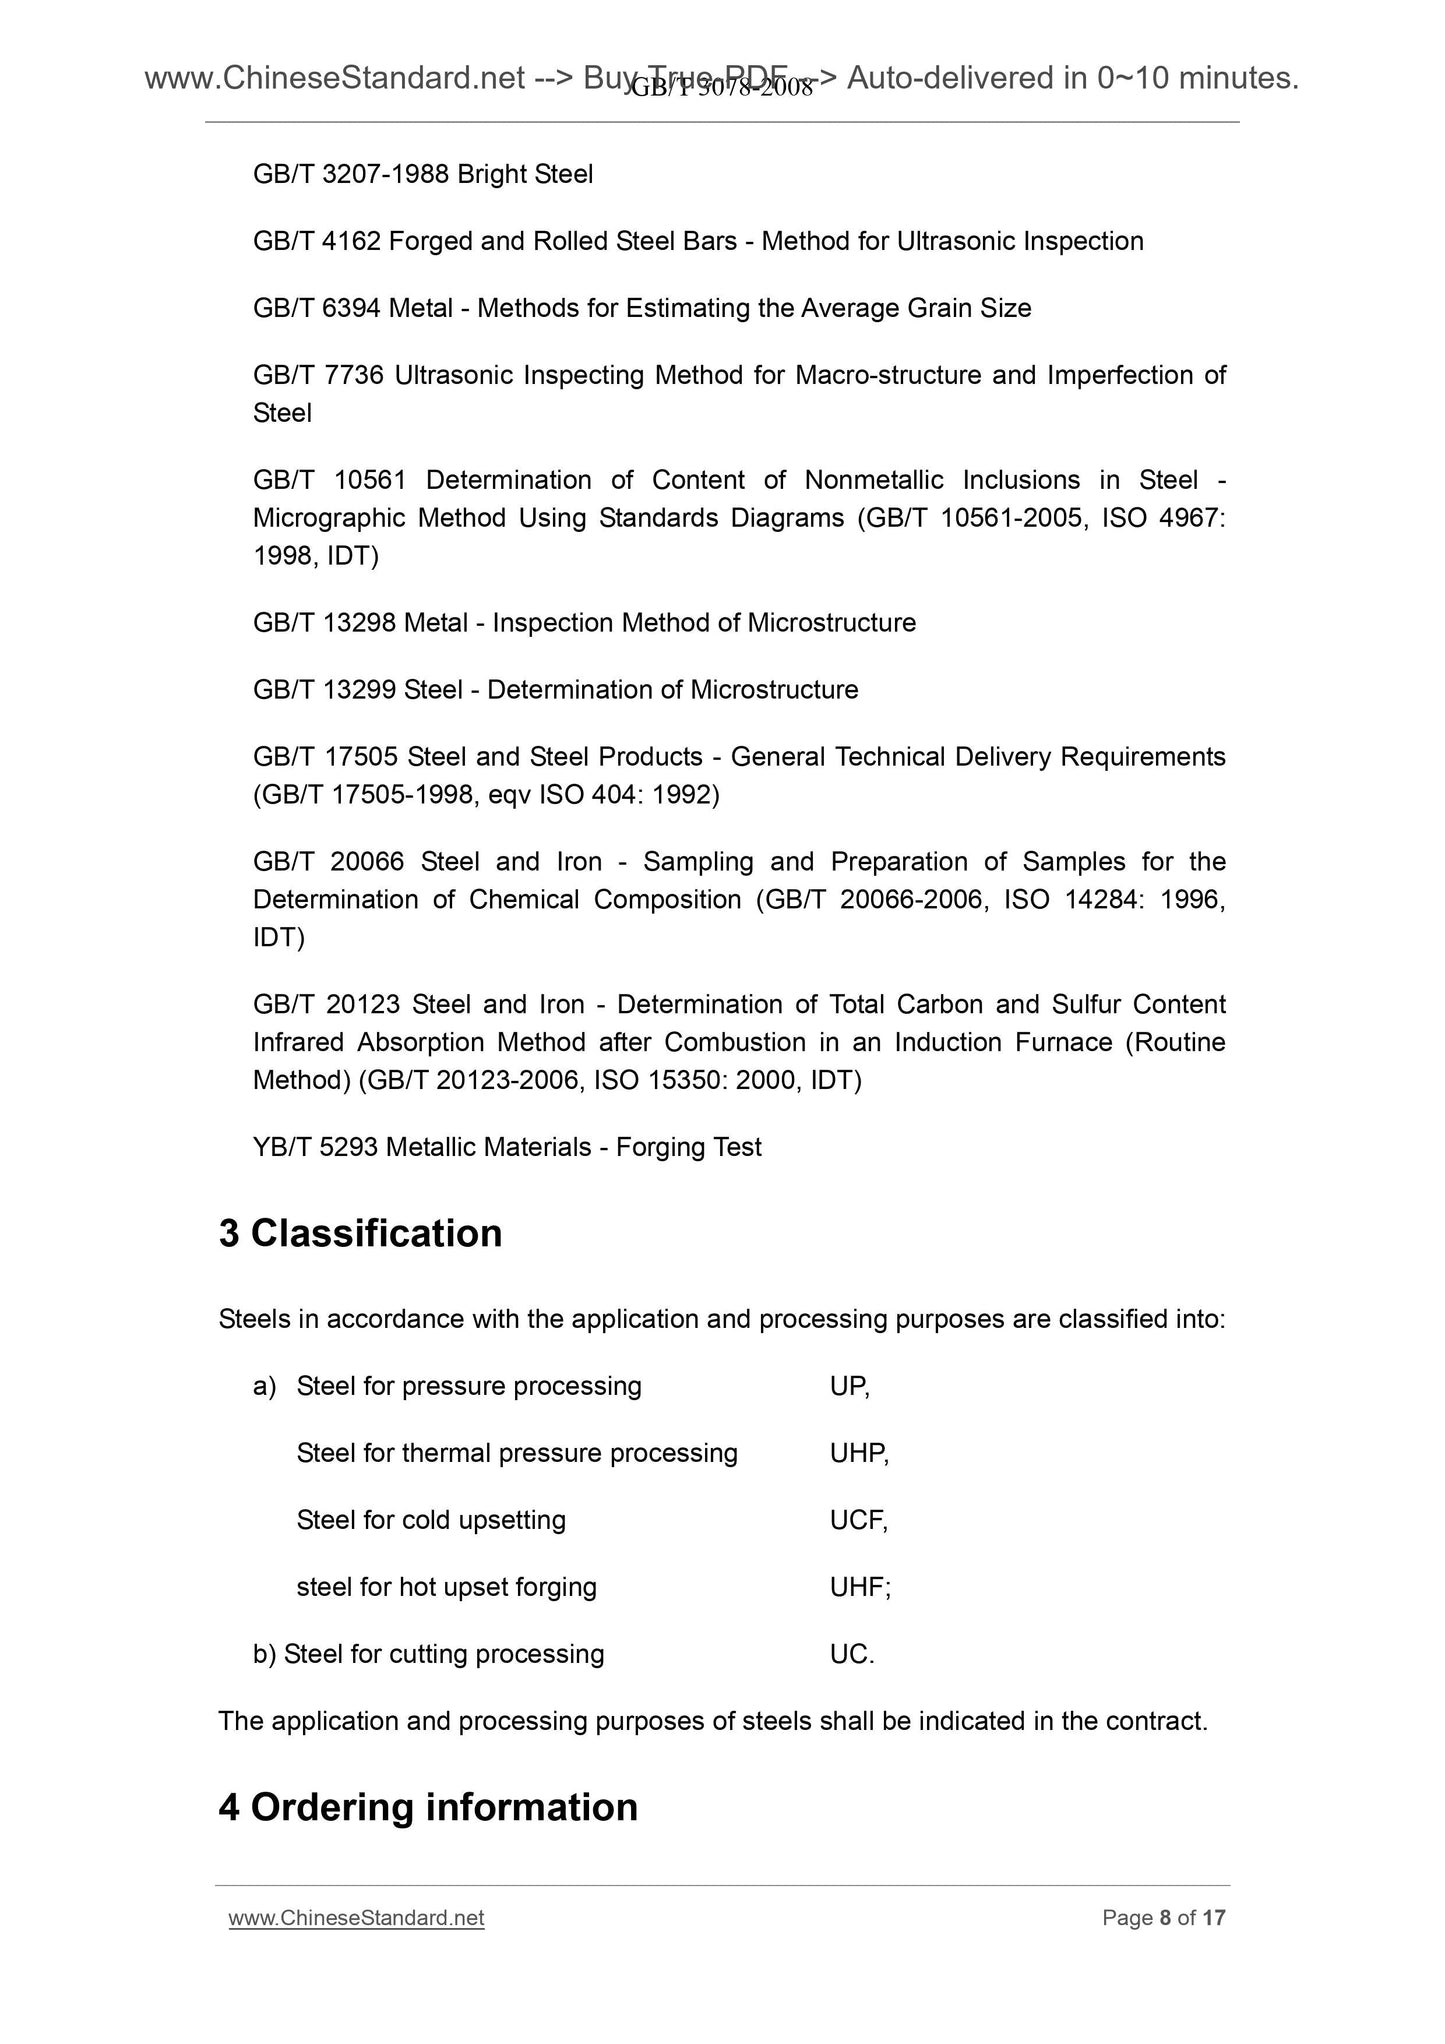 GB/T 3078-2008 Page 8